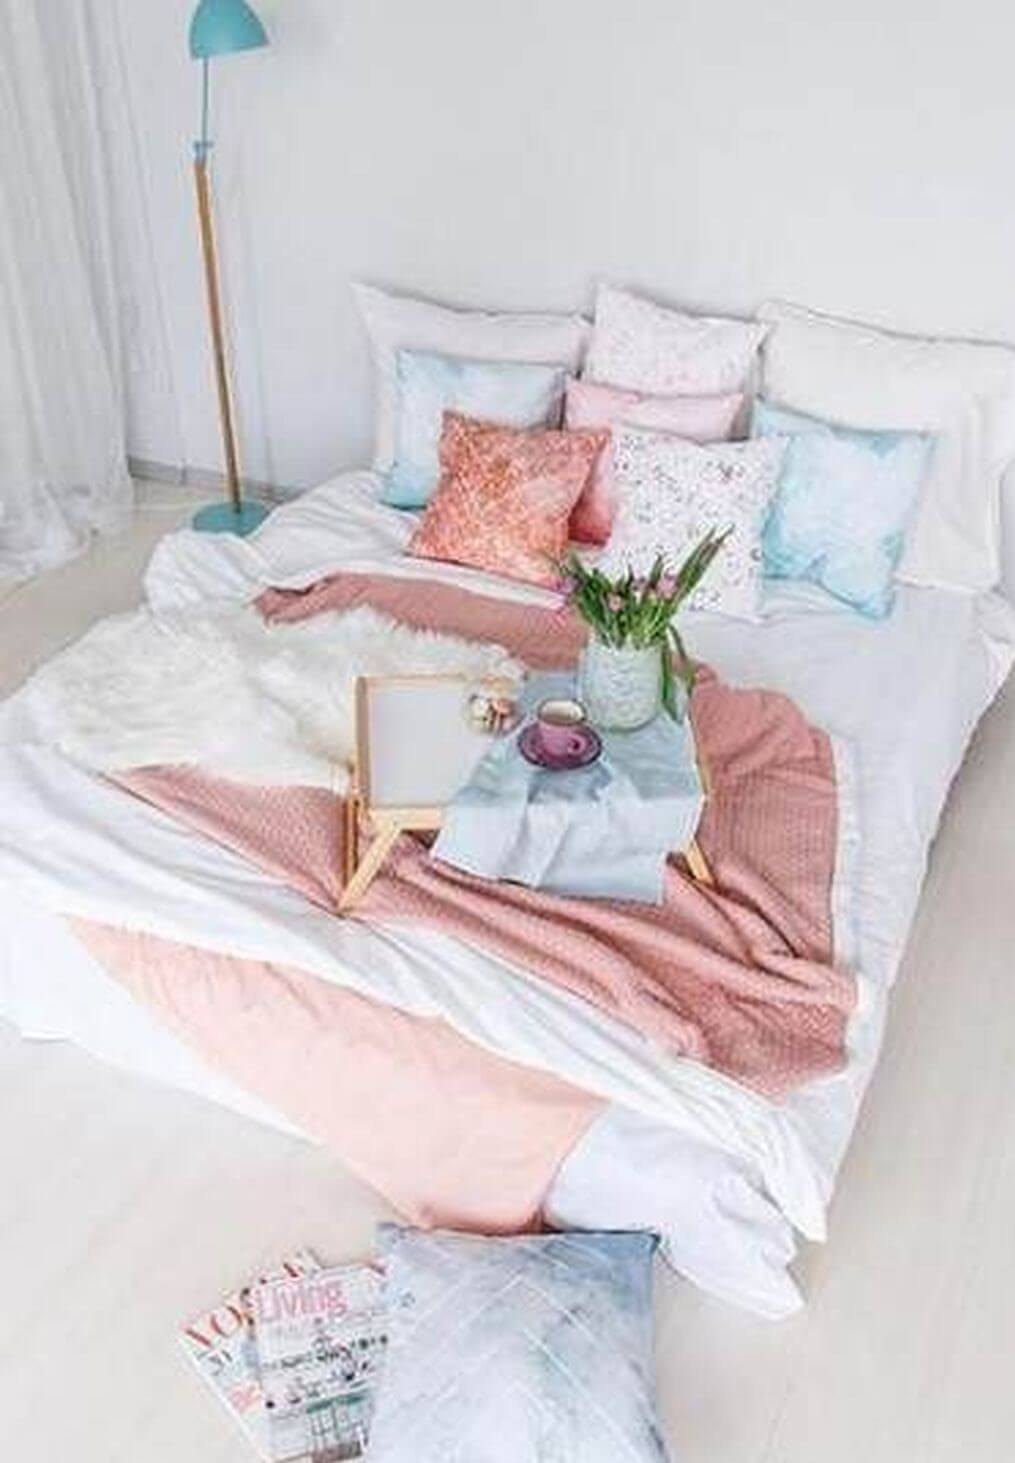 10. Blue, pink, and floral bedding